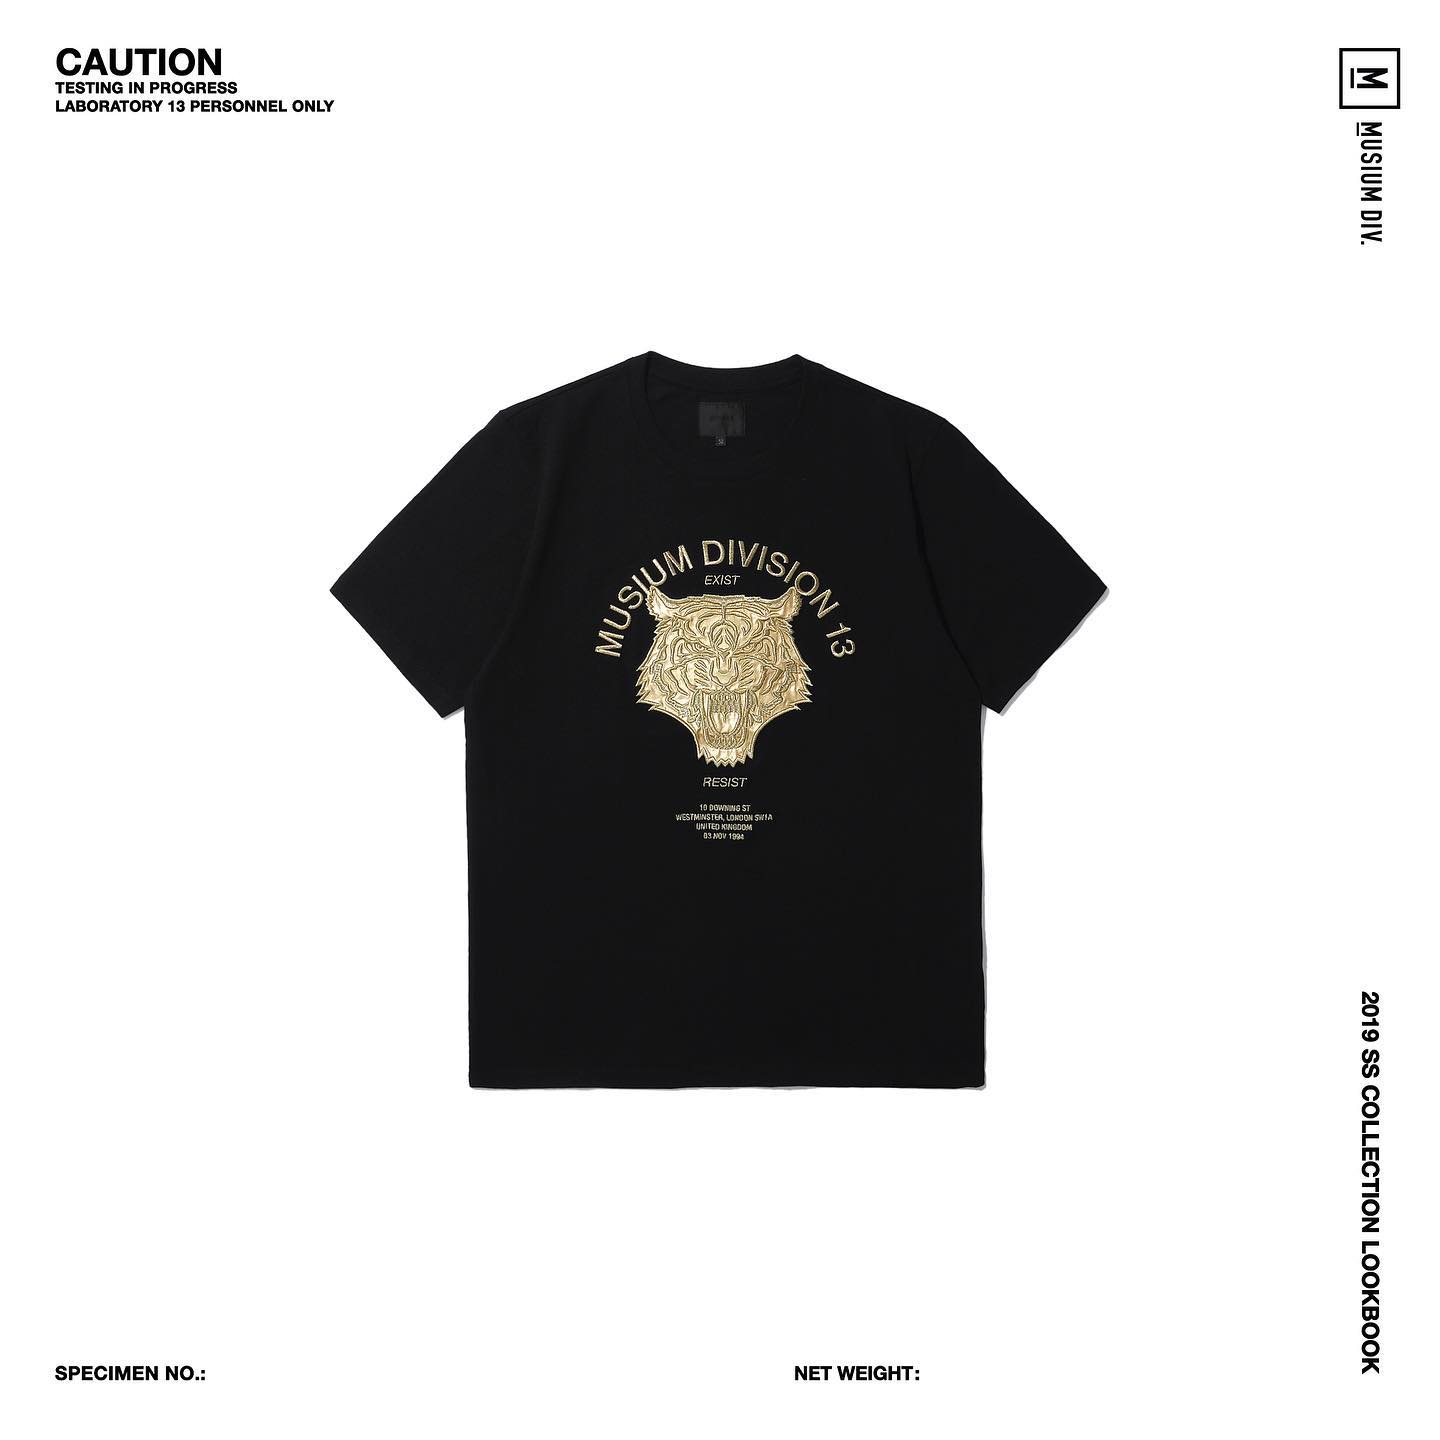 Check out the Musium SS19 golden embroidery tee at Musium Div. and double-park store. 